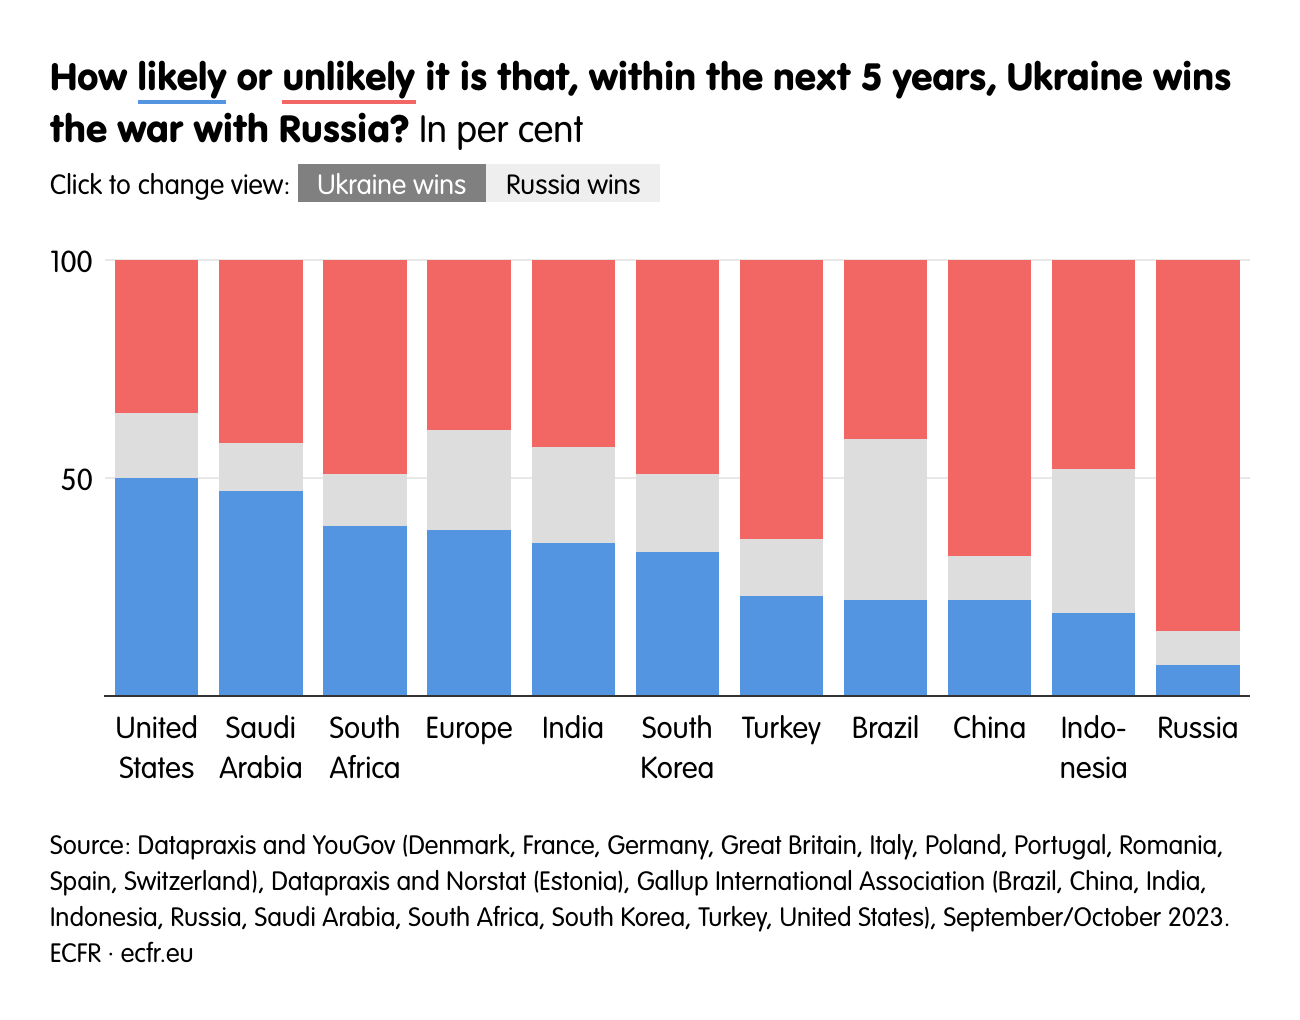 How likely or unlikely it is that, within the next 5 years, Ukraine wins the war with Russia?